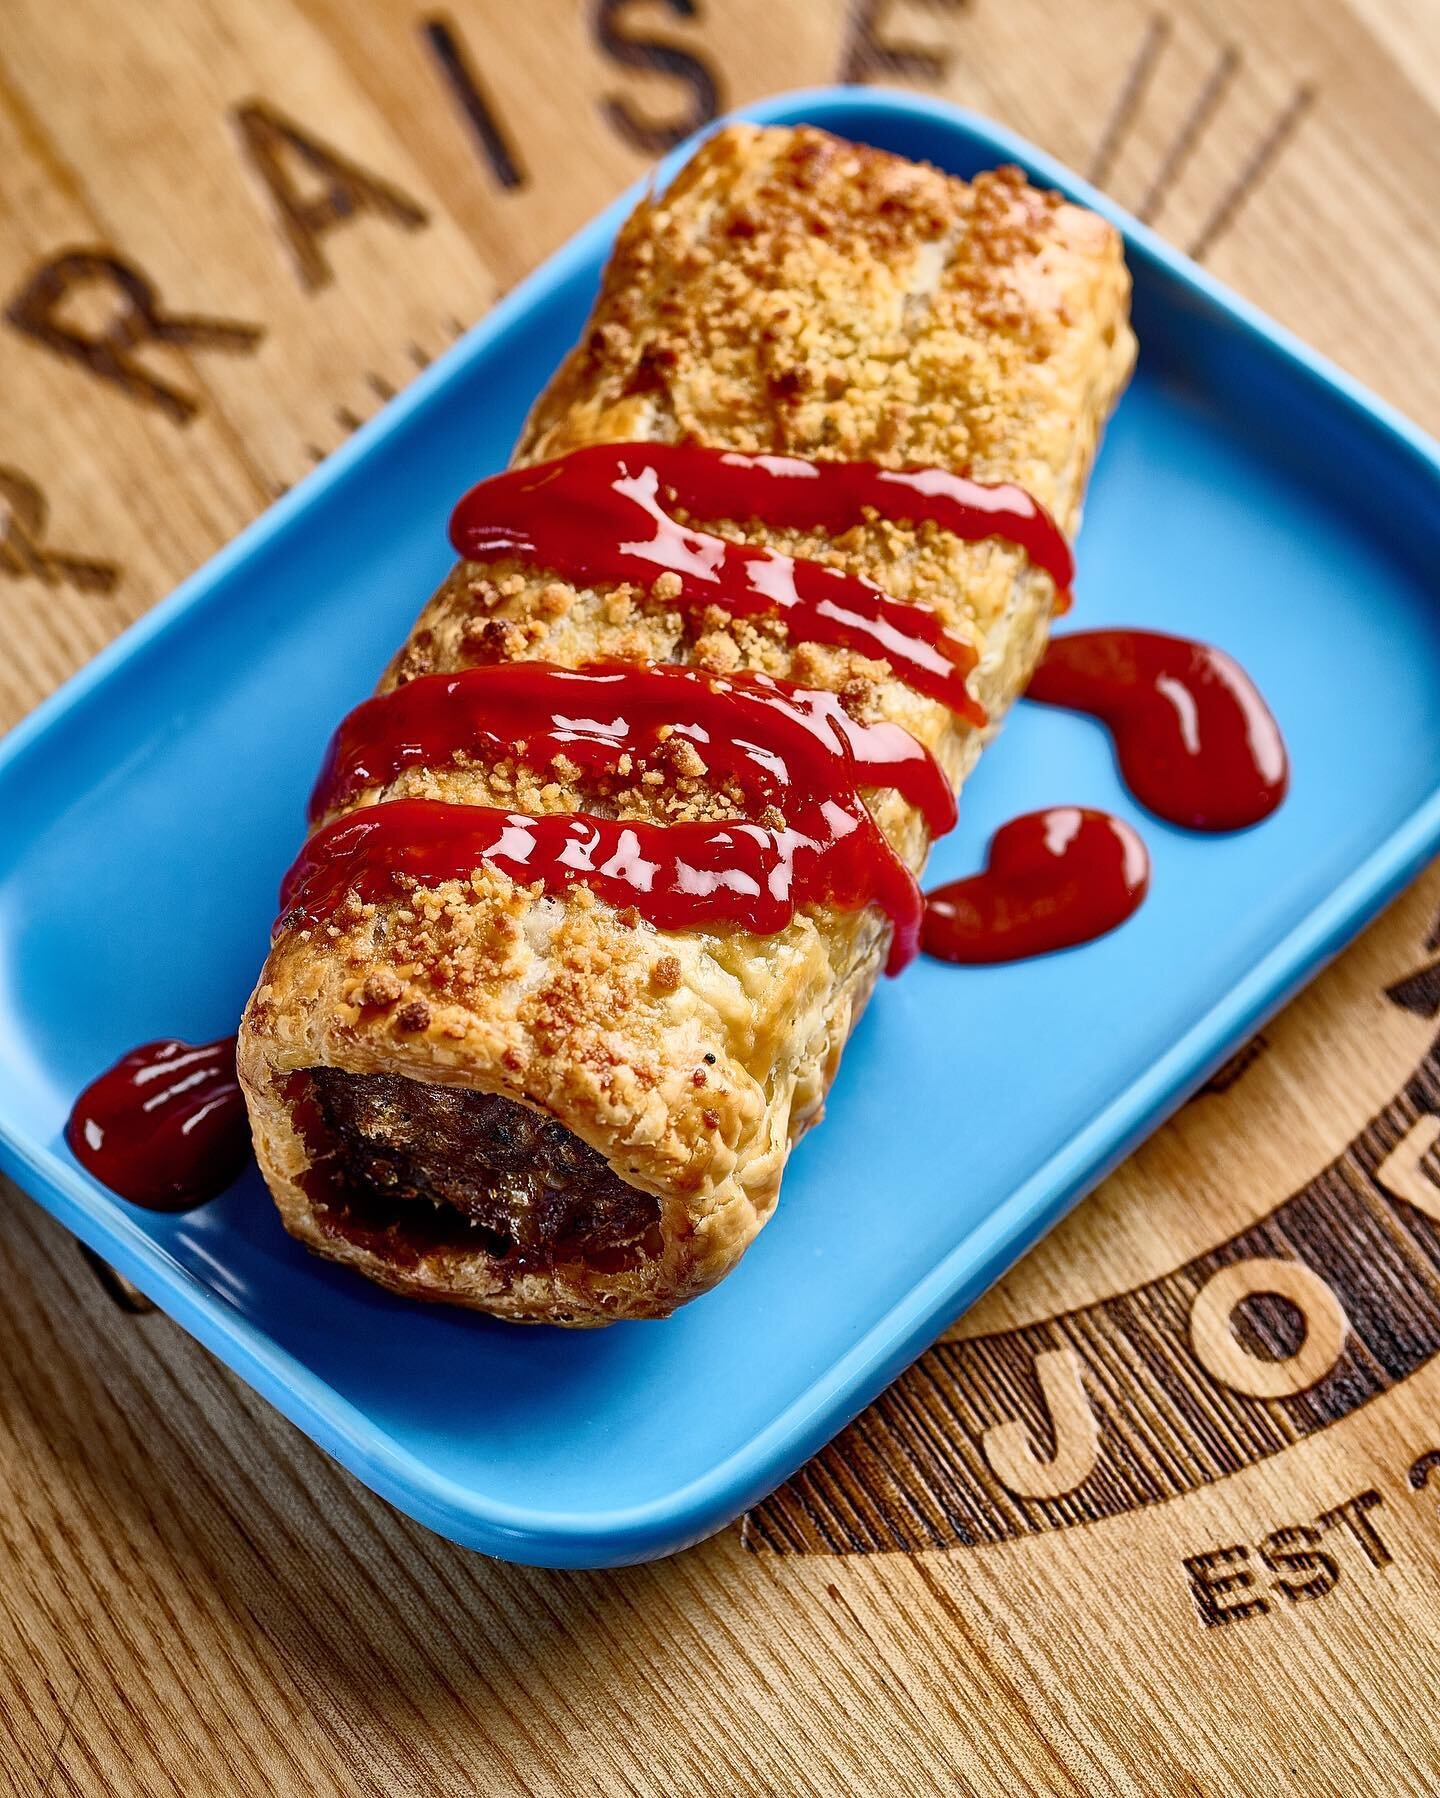 Sausage roll kind of morning ☔️ #sausagerolls #sausageroll #beefsausagerolls #tigheshill #delicious #deliciousfood